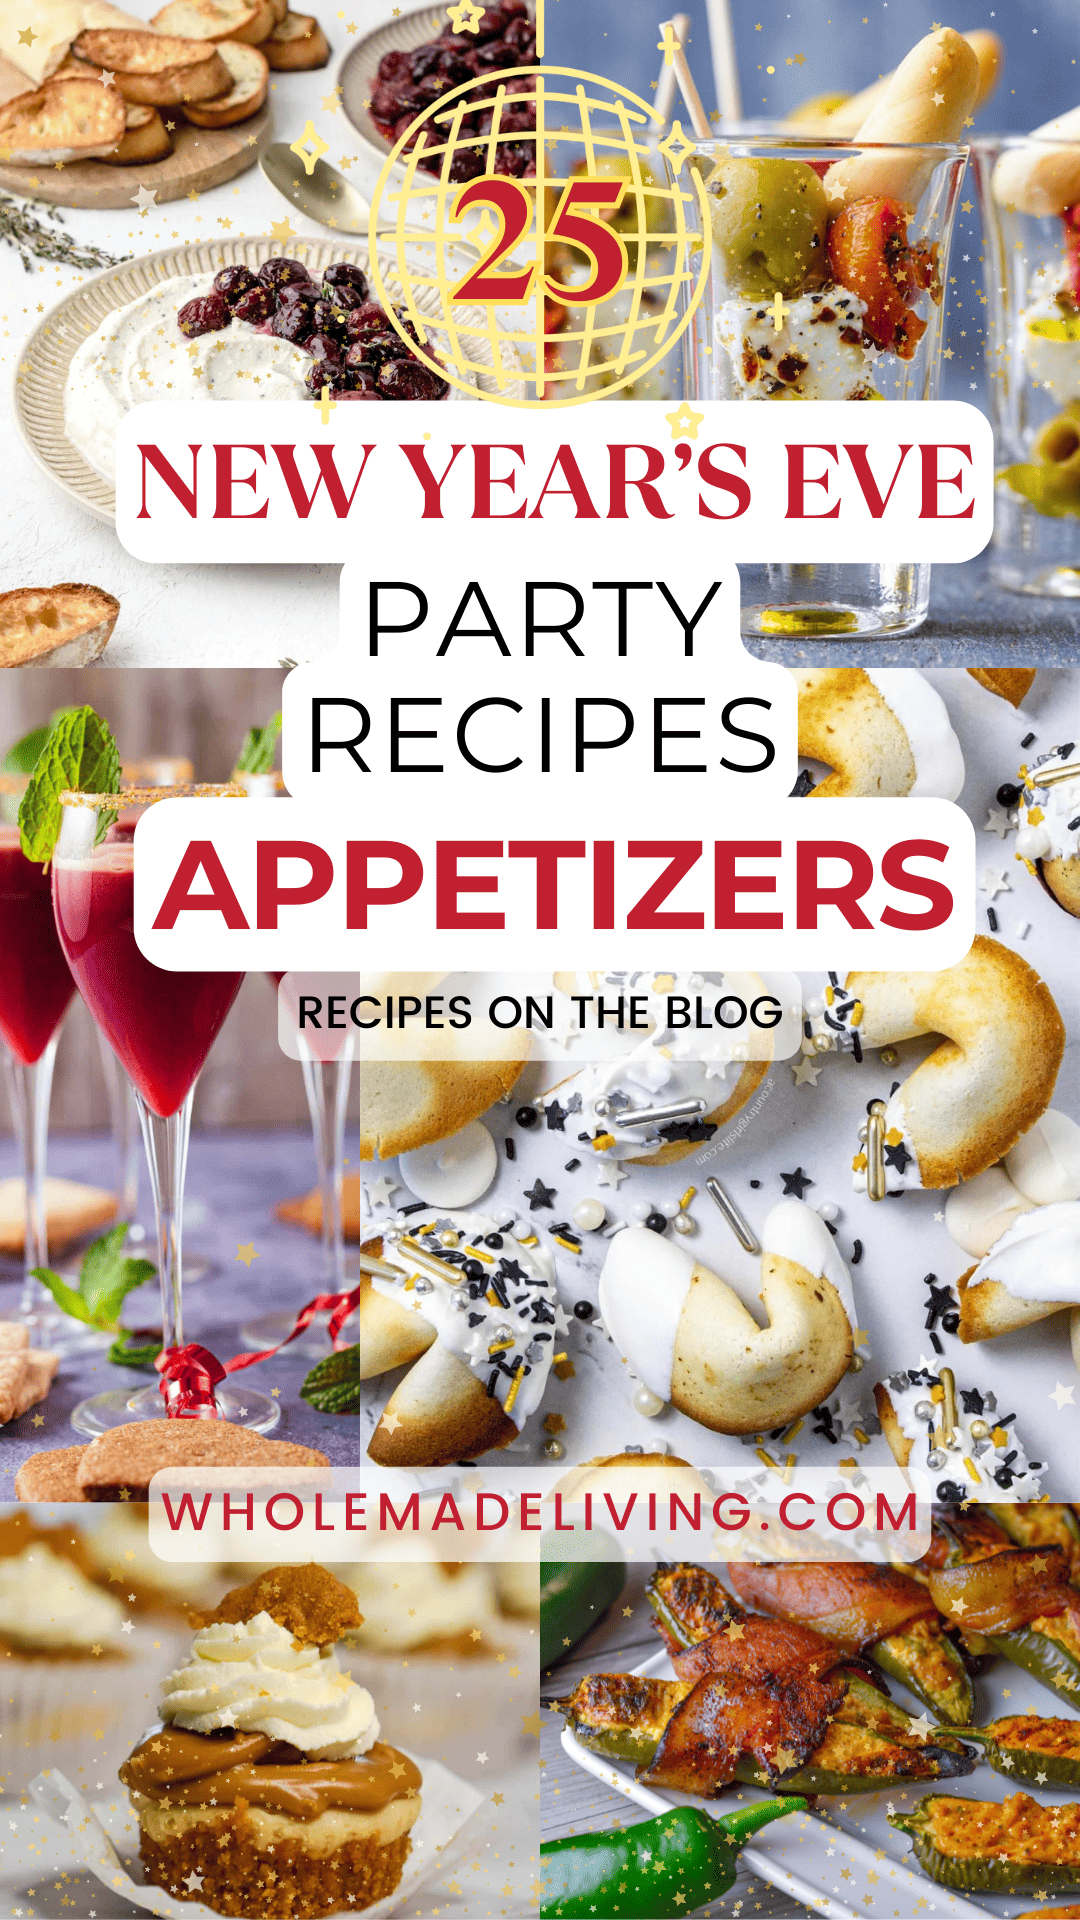 25 New Year's Eve Party Recipes for Appetizers Pinterest Pin 1